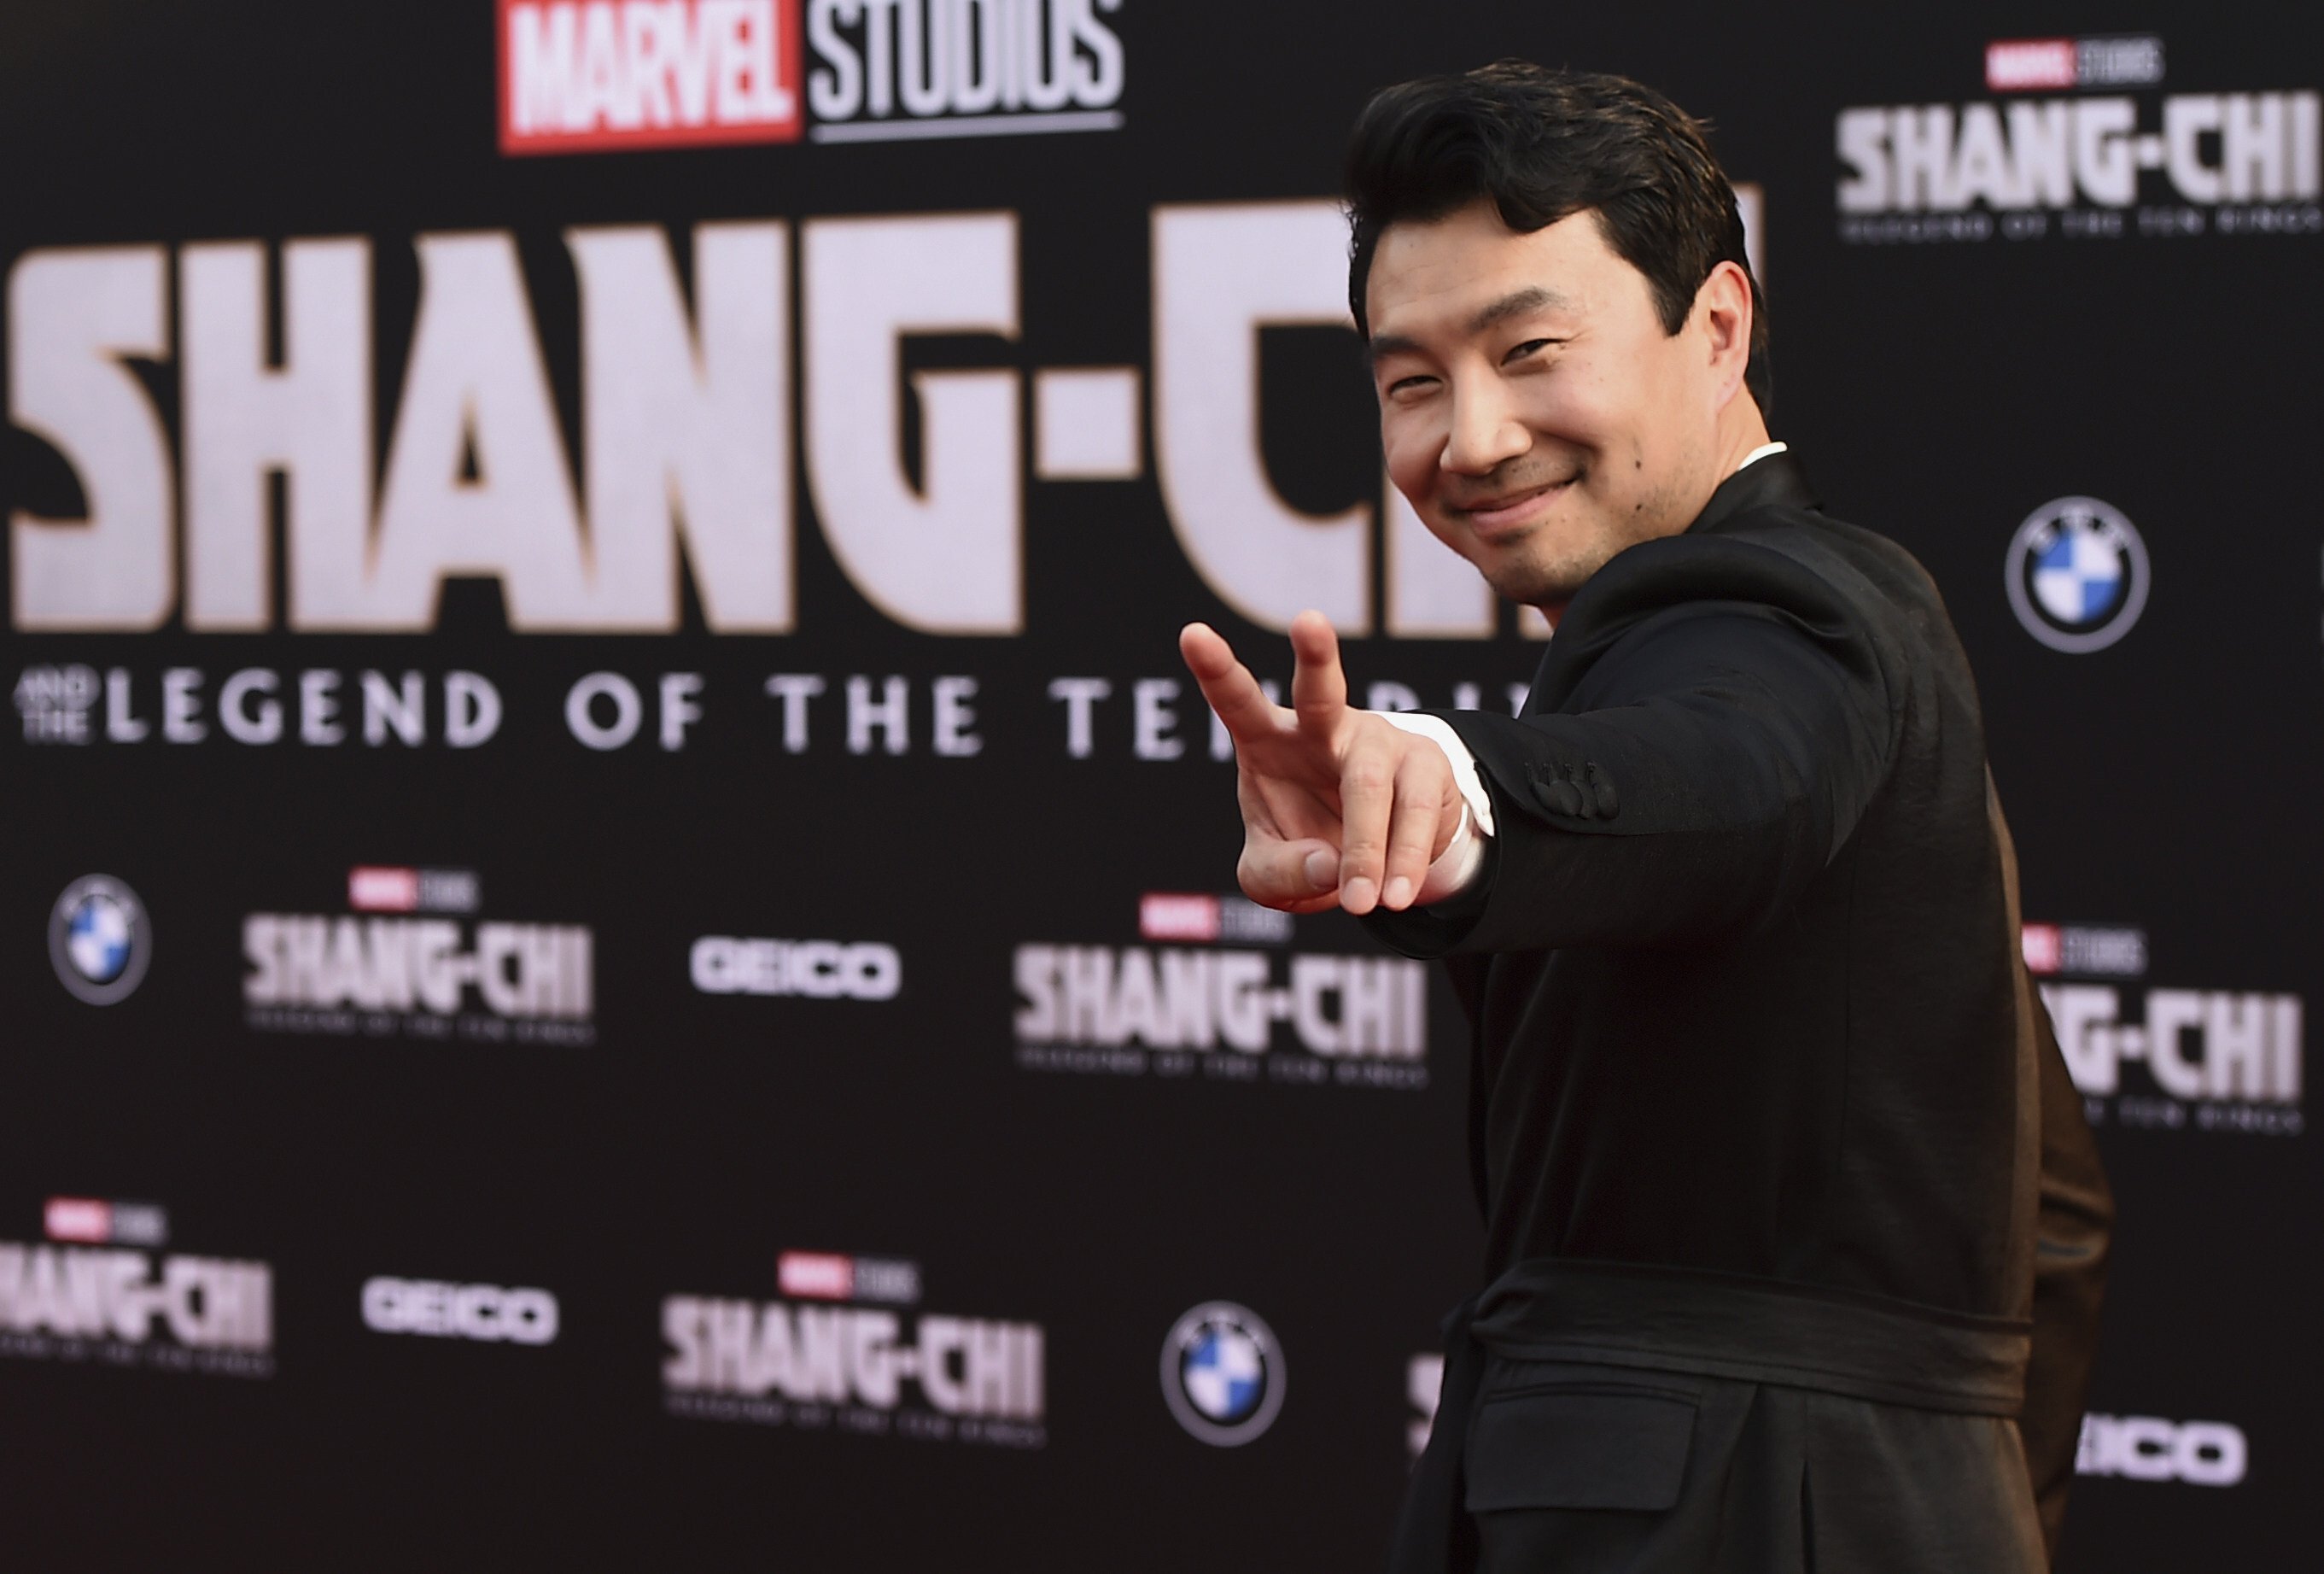 Simu Liu, Marvel's First Asian Superhero, Is a Force to Be Reckoned With